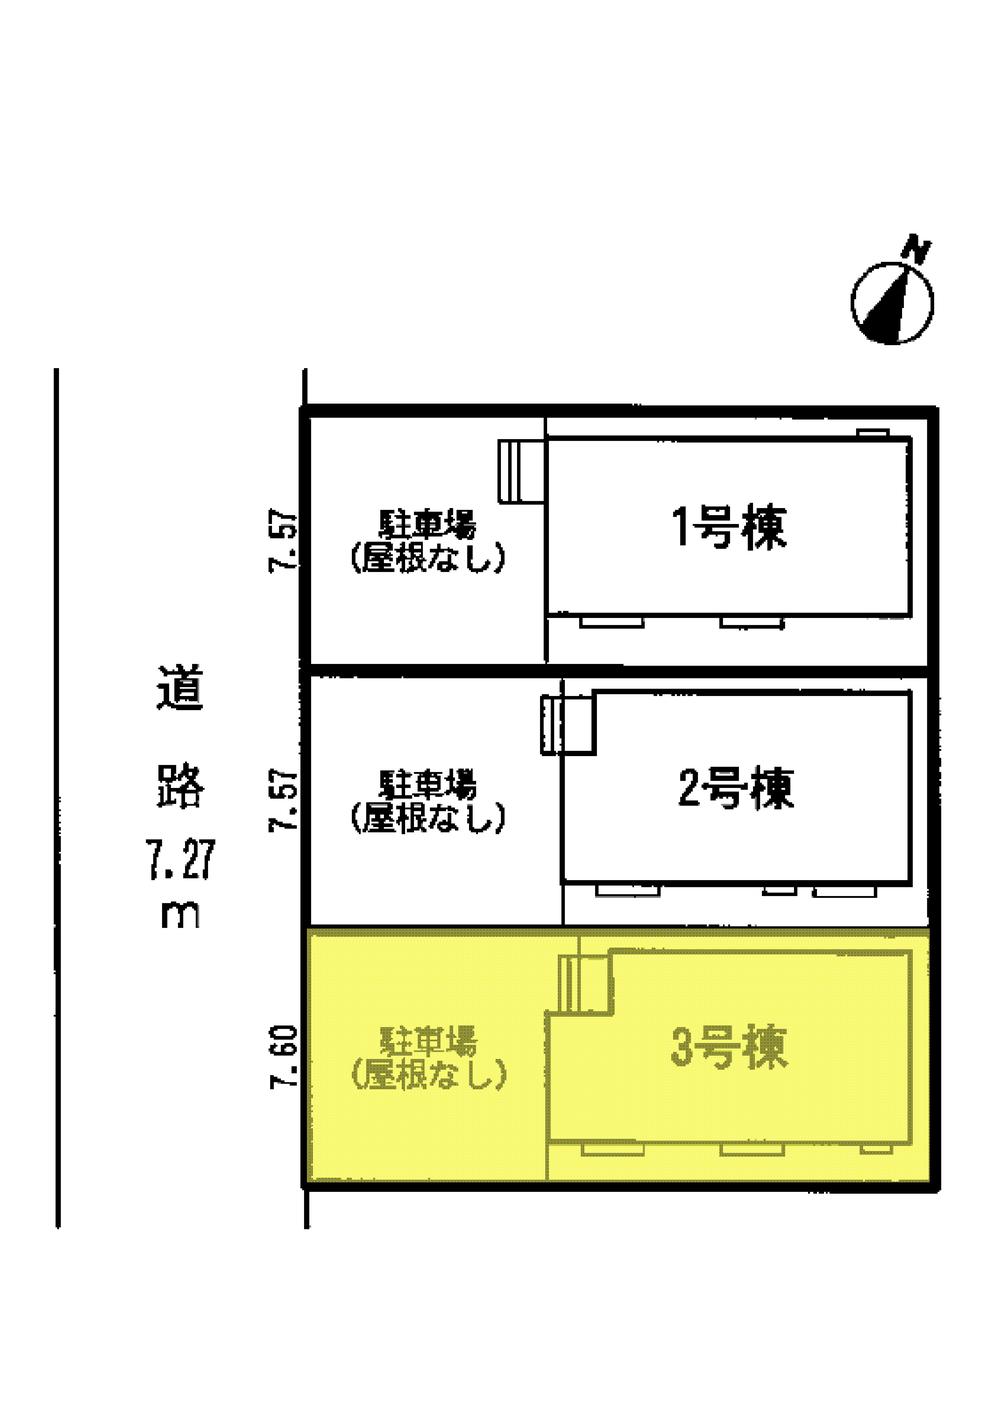 The entire compartment Figure. Yellow part is the Building 3. 